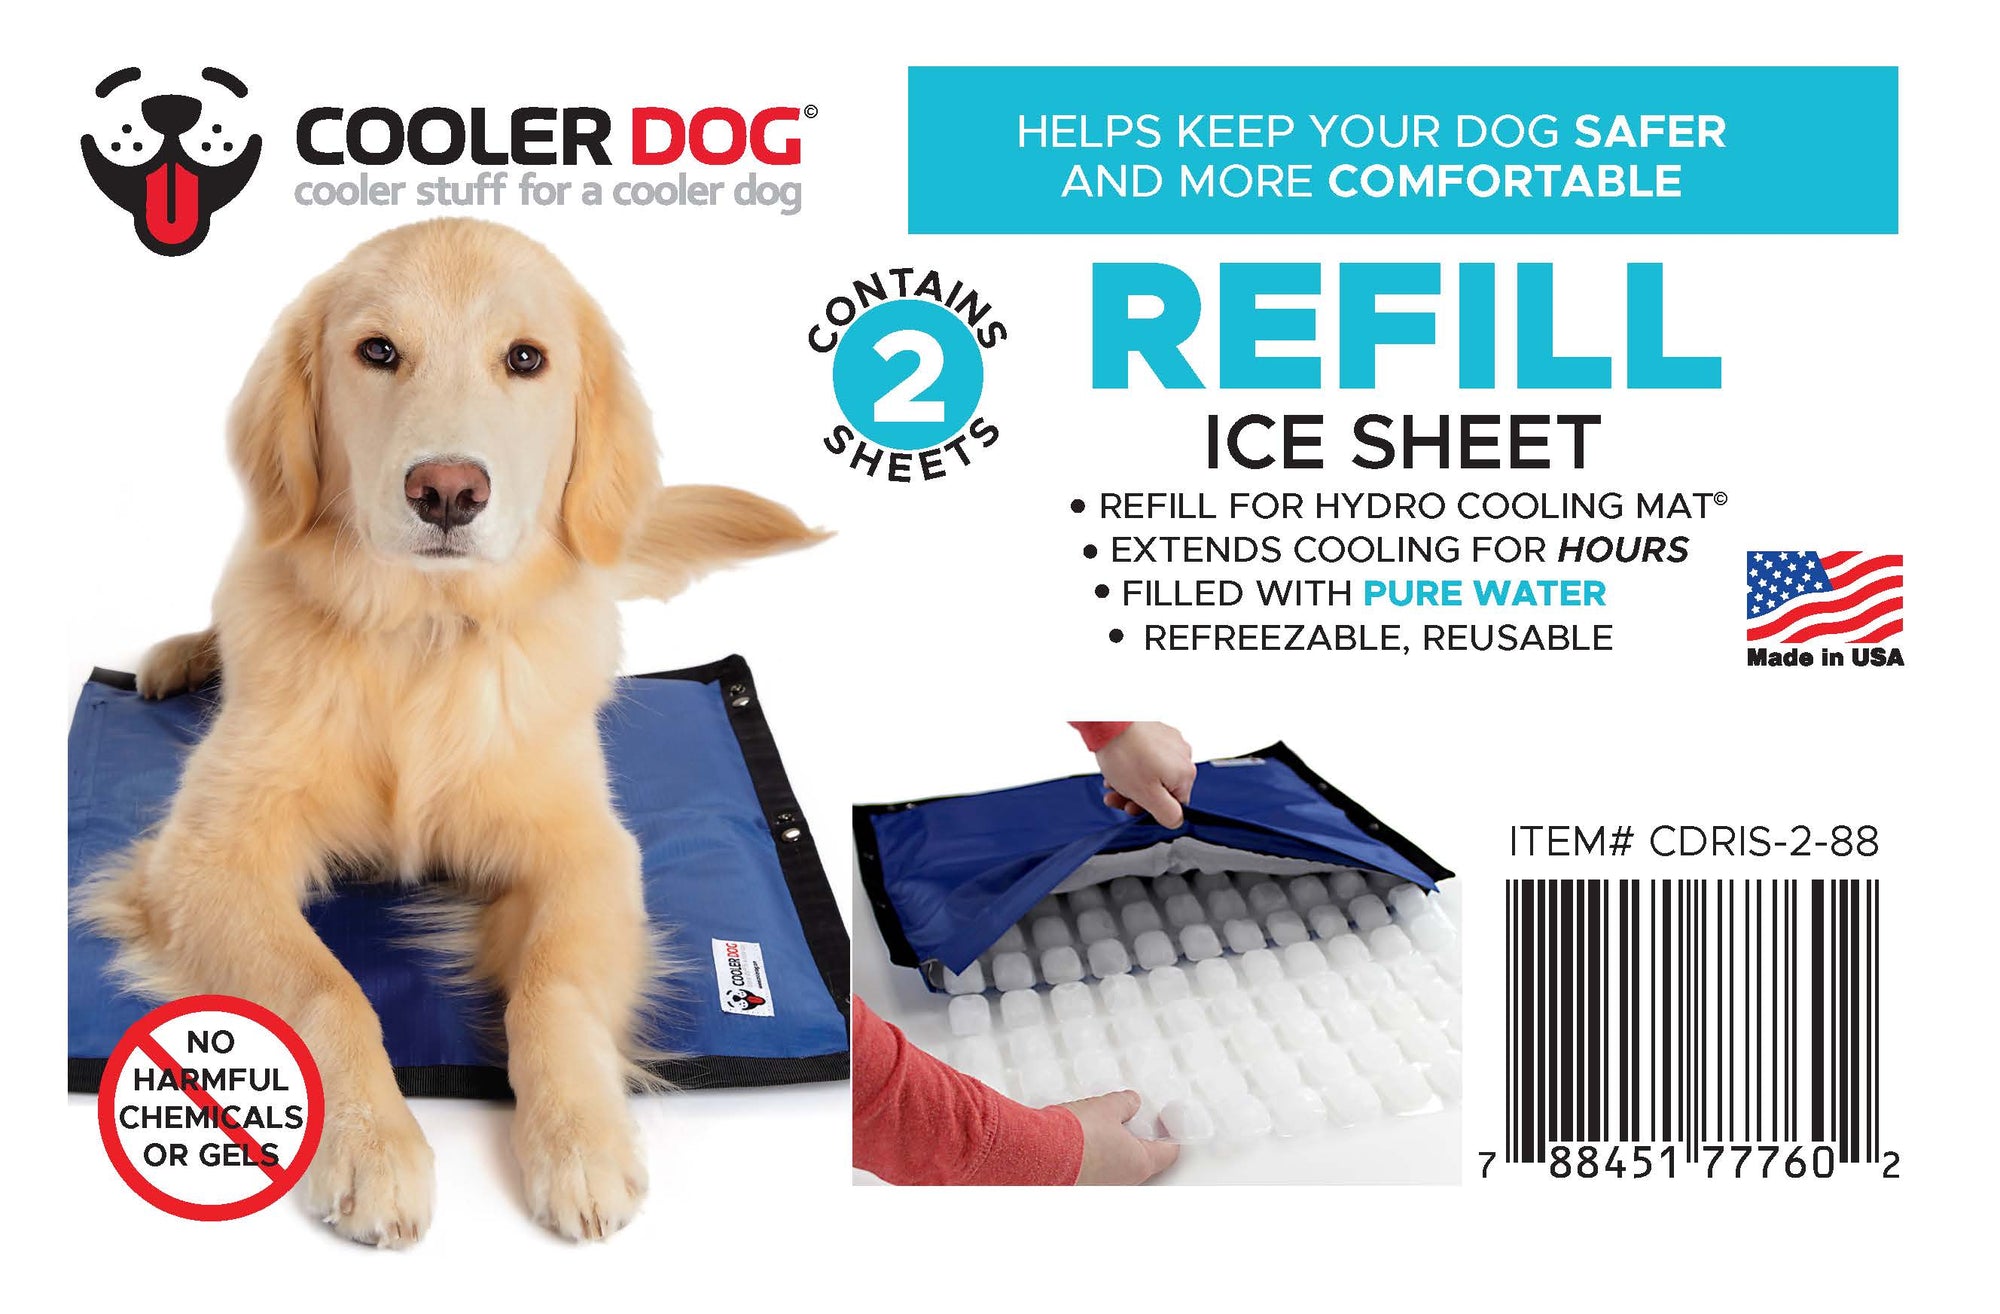 Informational box panel for CoolerDog brand refill ice sheet